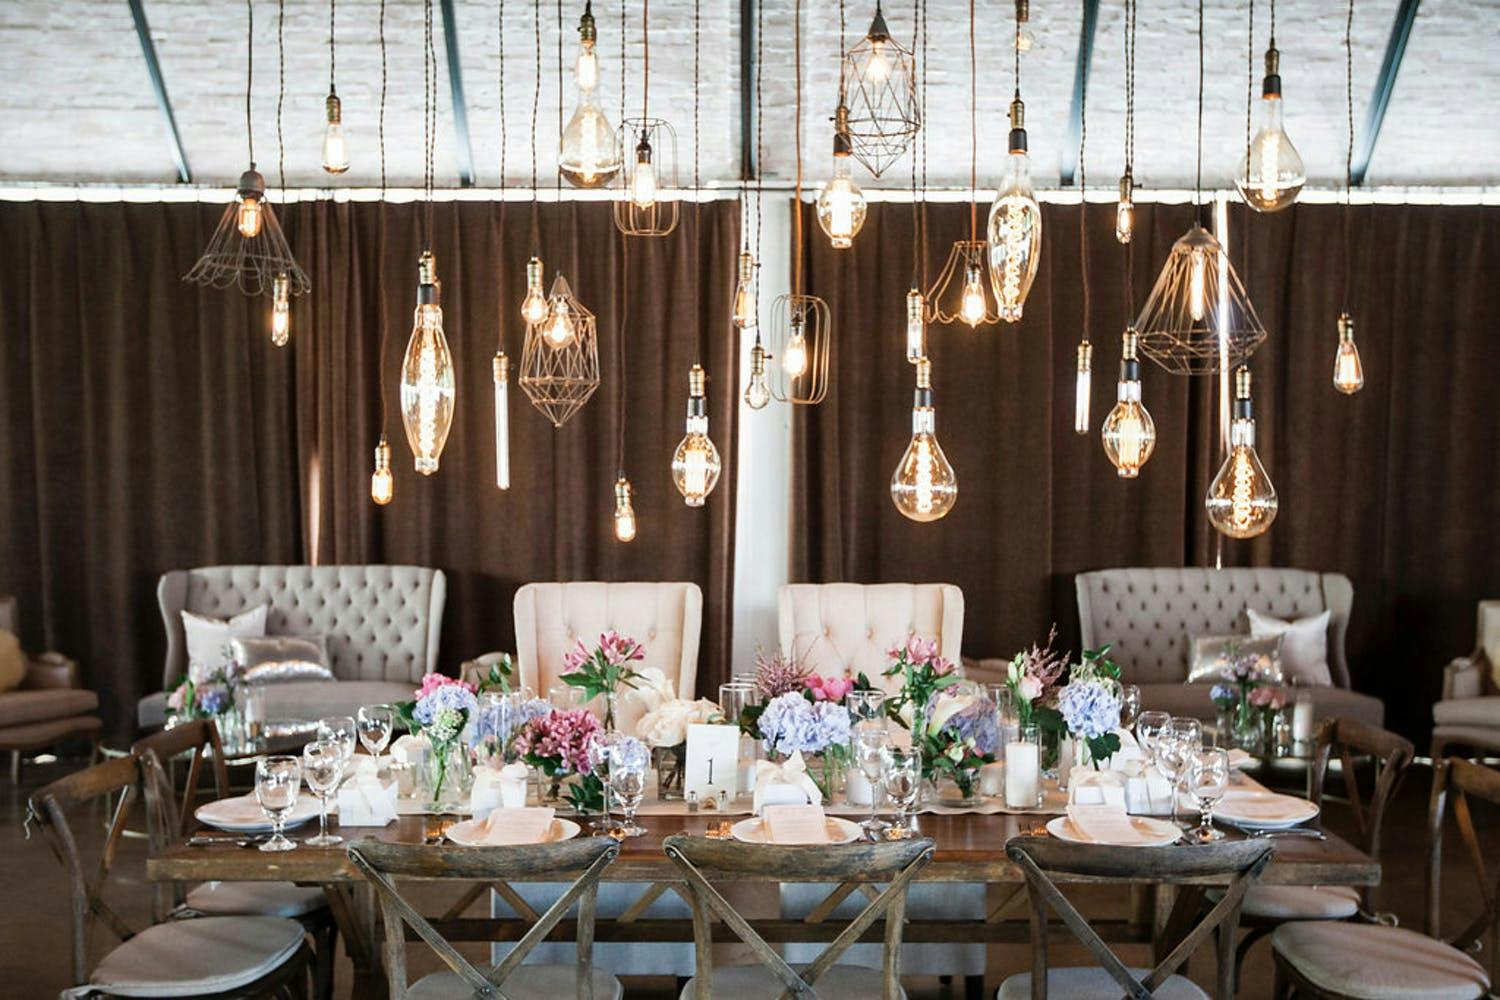 Wedding Party Table in Pastel Color Schemes With Geometric Lighting Installation | PartySlate